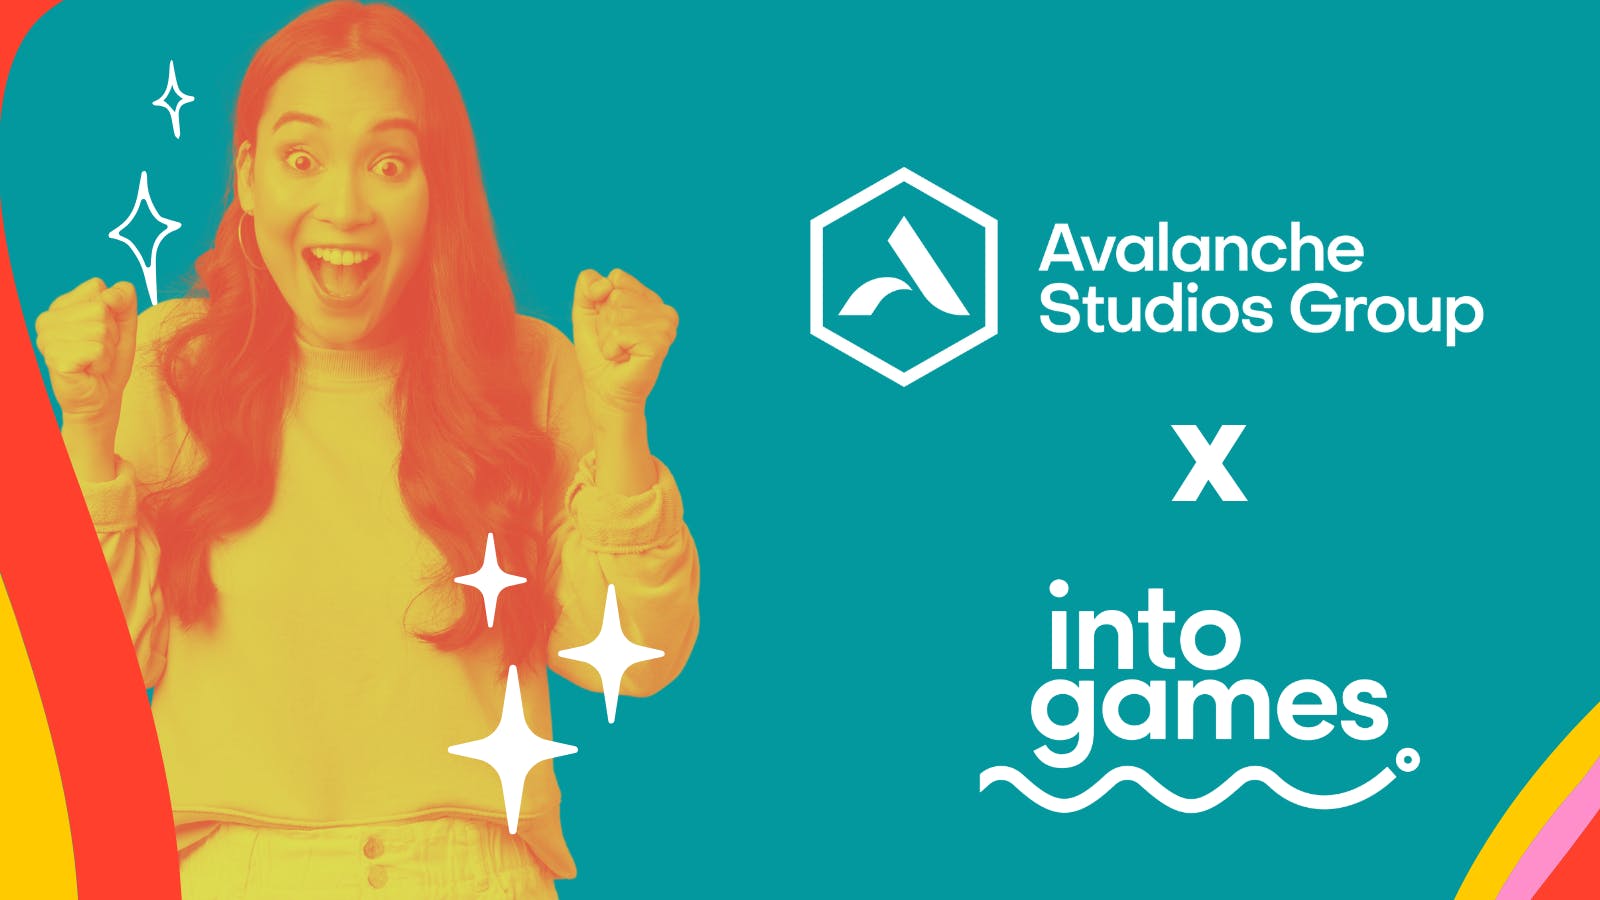 Into Games are partnering with Avalanche Studios Group! 